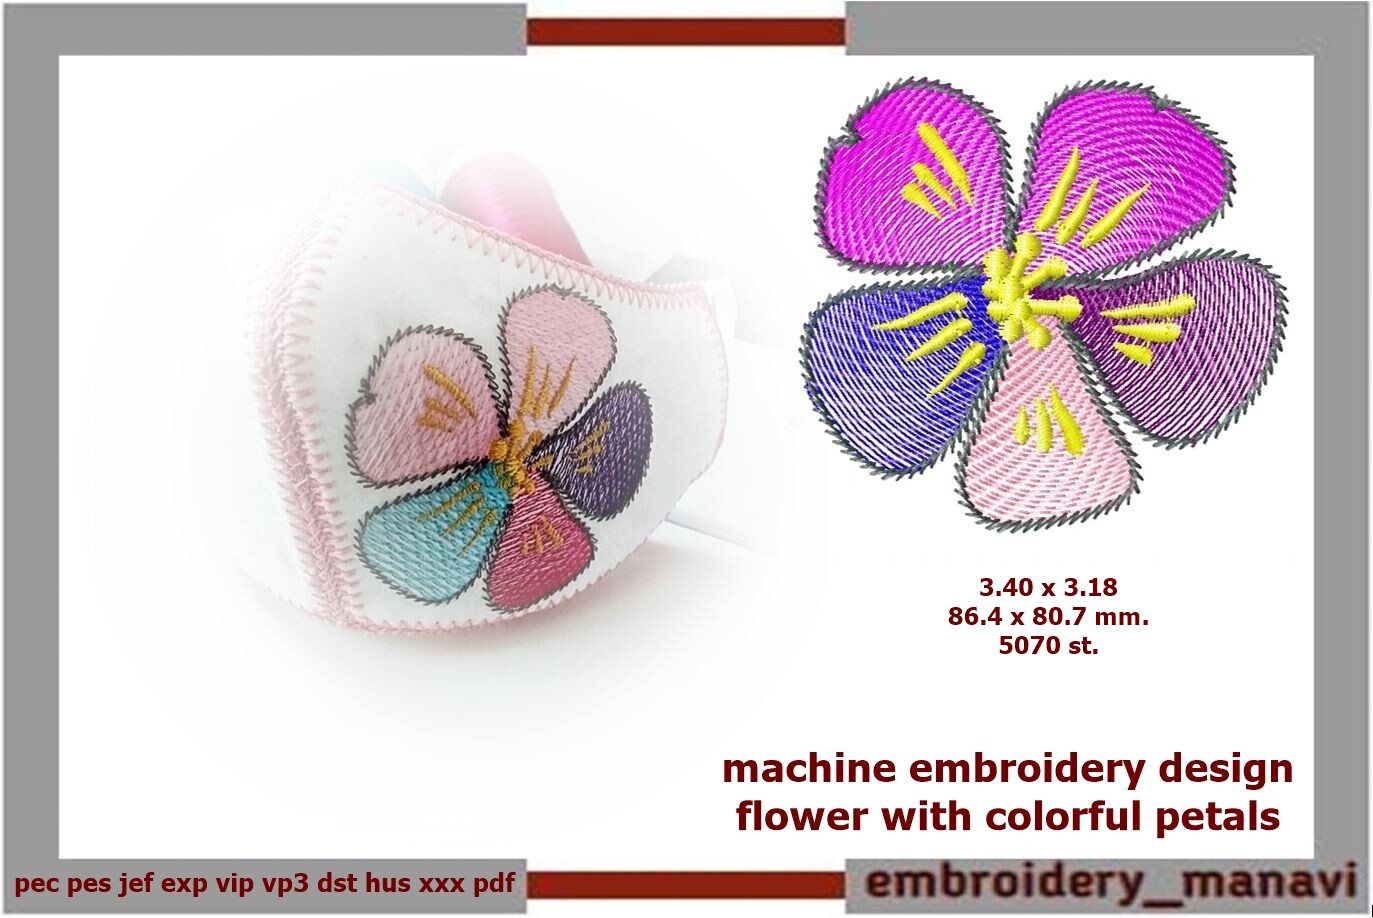 https://www.creativefabrica.com/wp-content/uploads/2023/09/12/Flower-with-Colorful-Petals-Embroidery-79077965-1.jpg